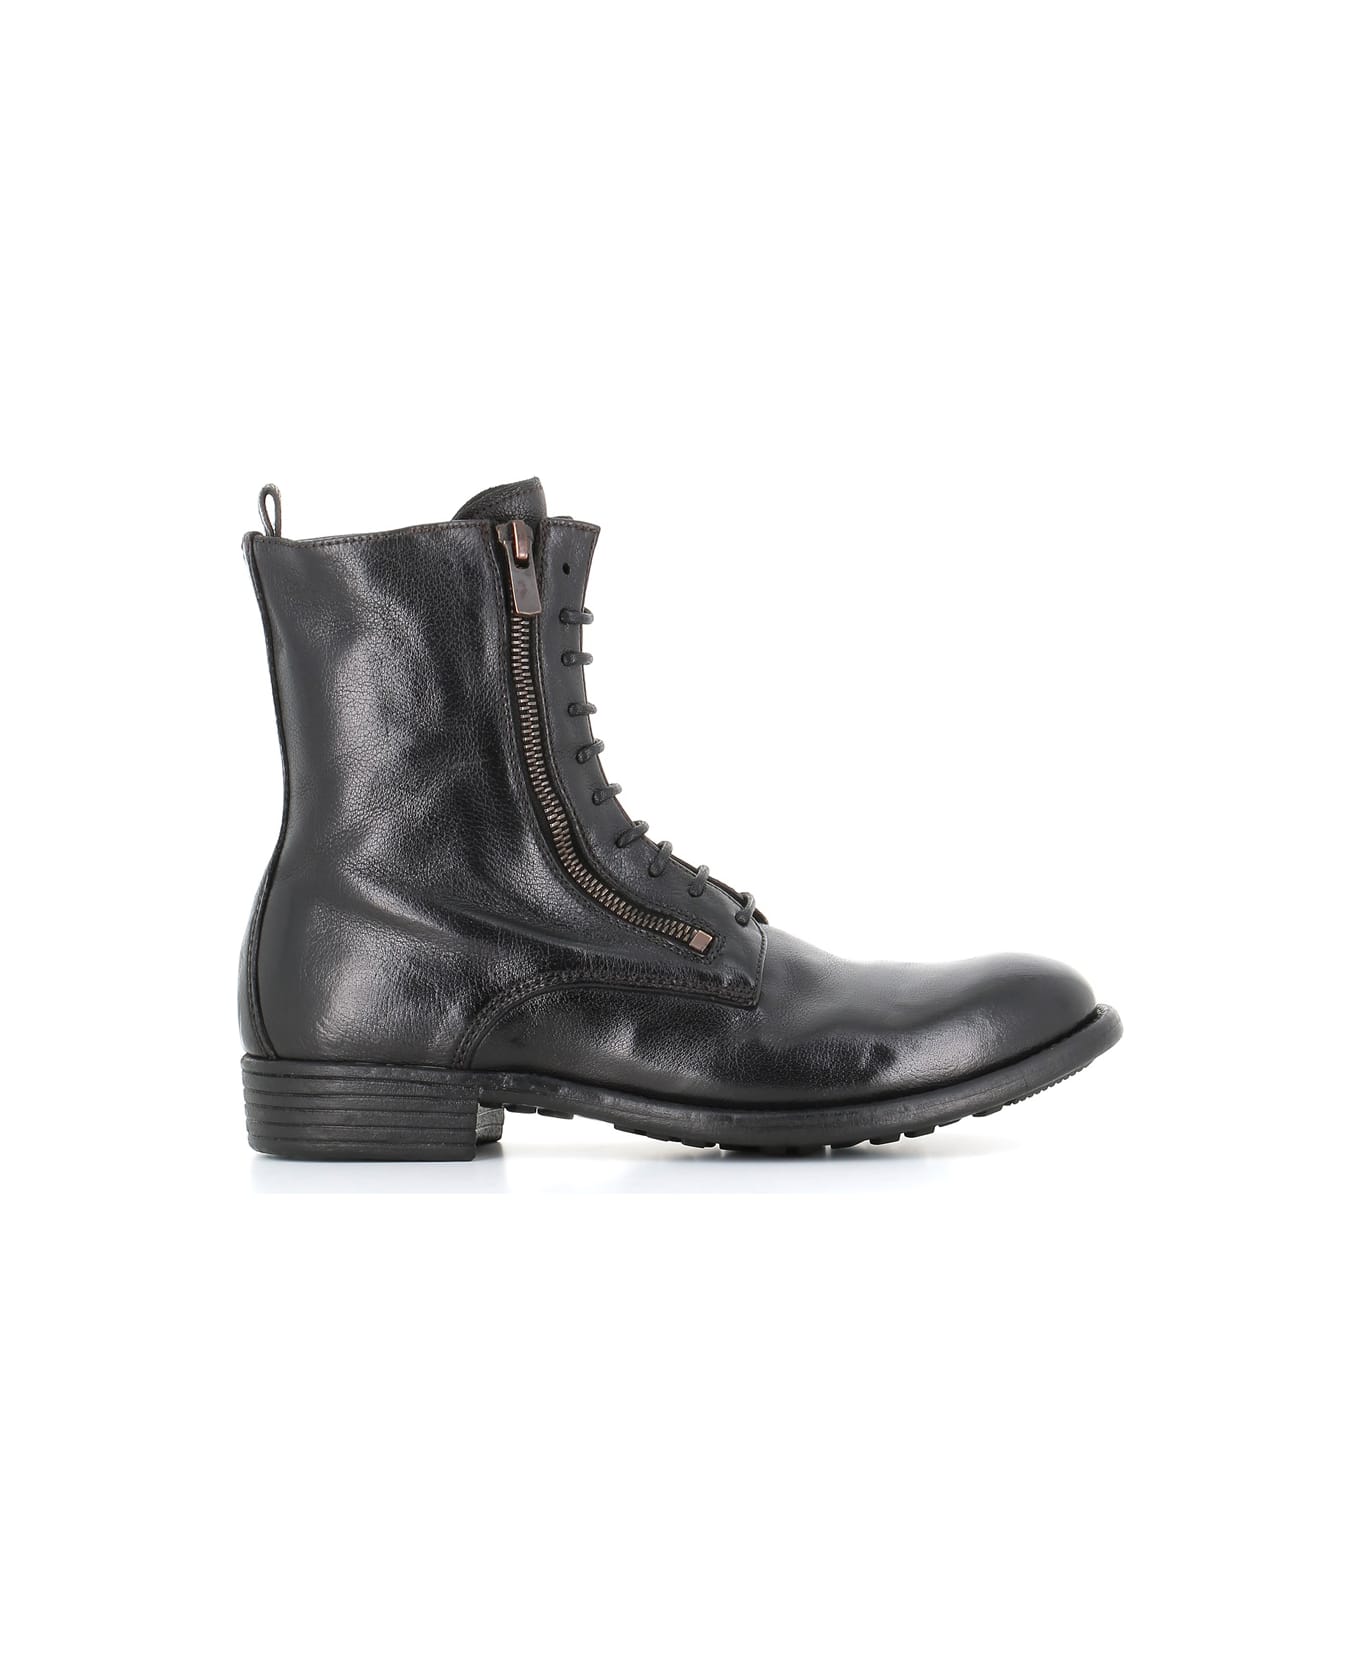 Officine Creative Lace-up Boot Calixte/051 - Black ブーツ